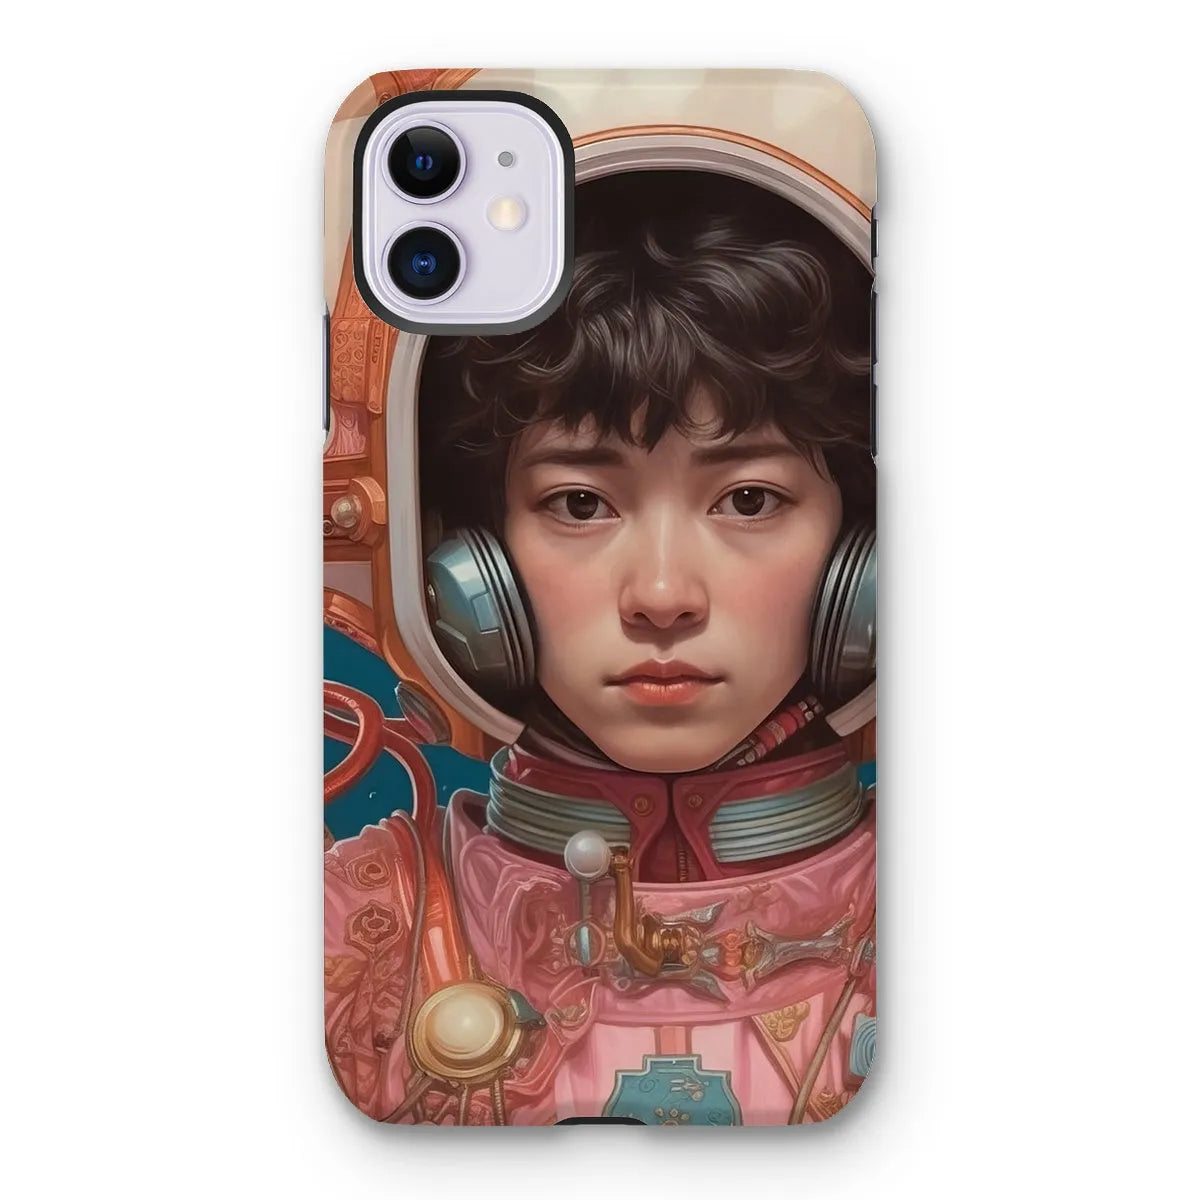 Kaito The Gay Astronaut - Lgbtq Art Phone Case - Iphone 11 / Matte - Mobile Phone Cases - Aesthetic Art